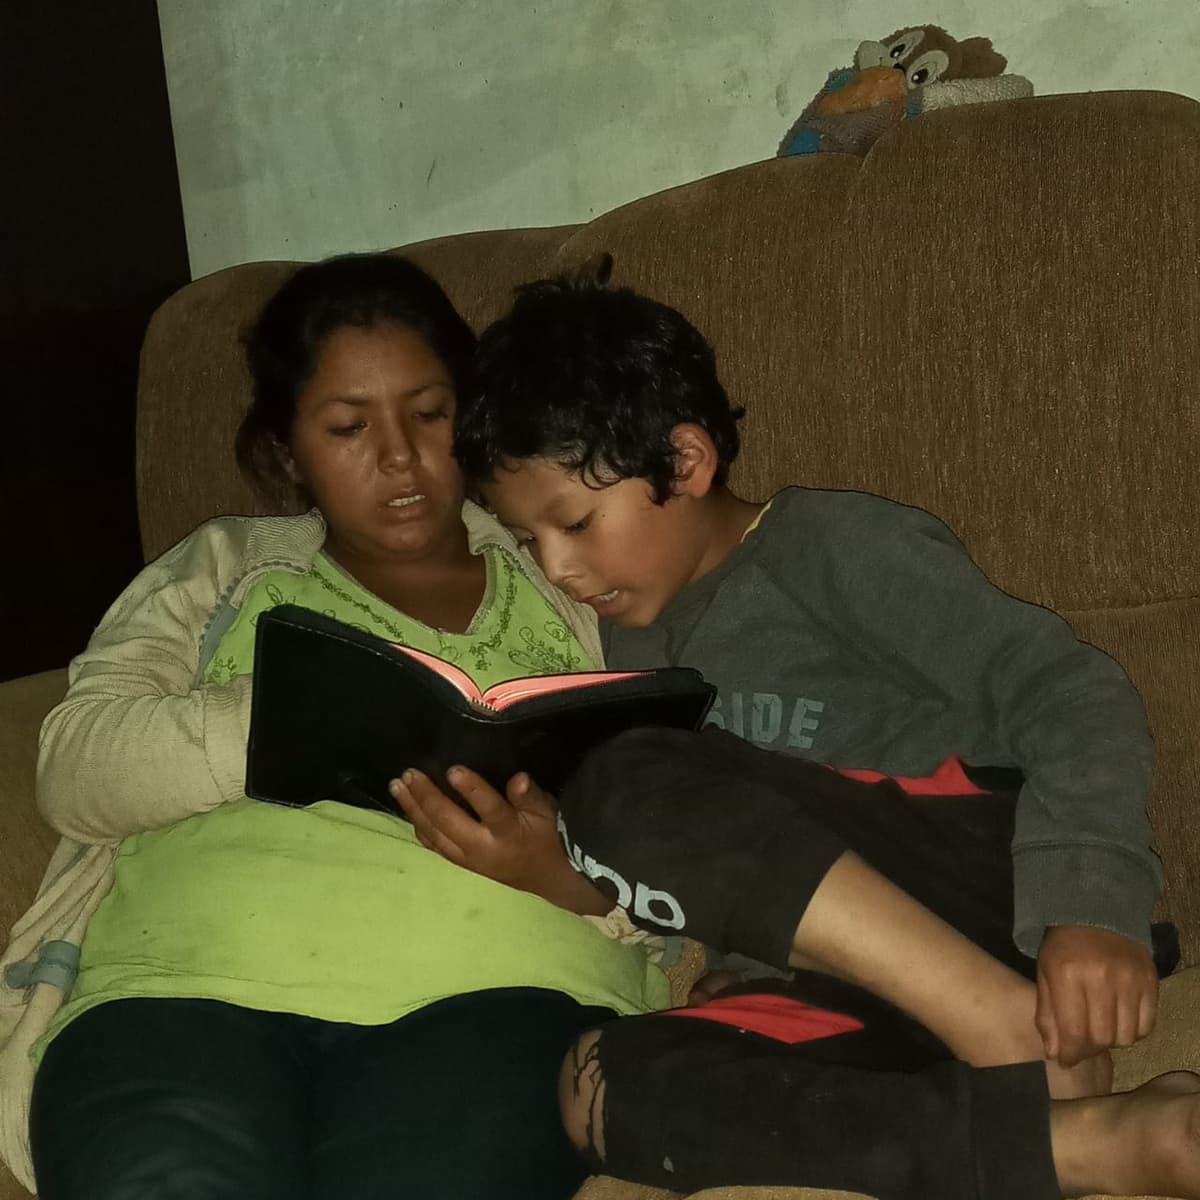 A Bolibian woman sits on a bed with her son and reads the Bible.